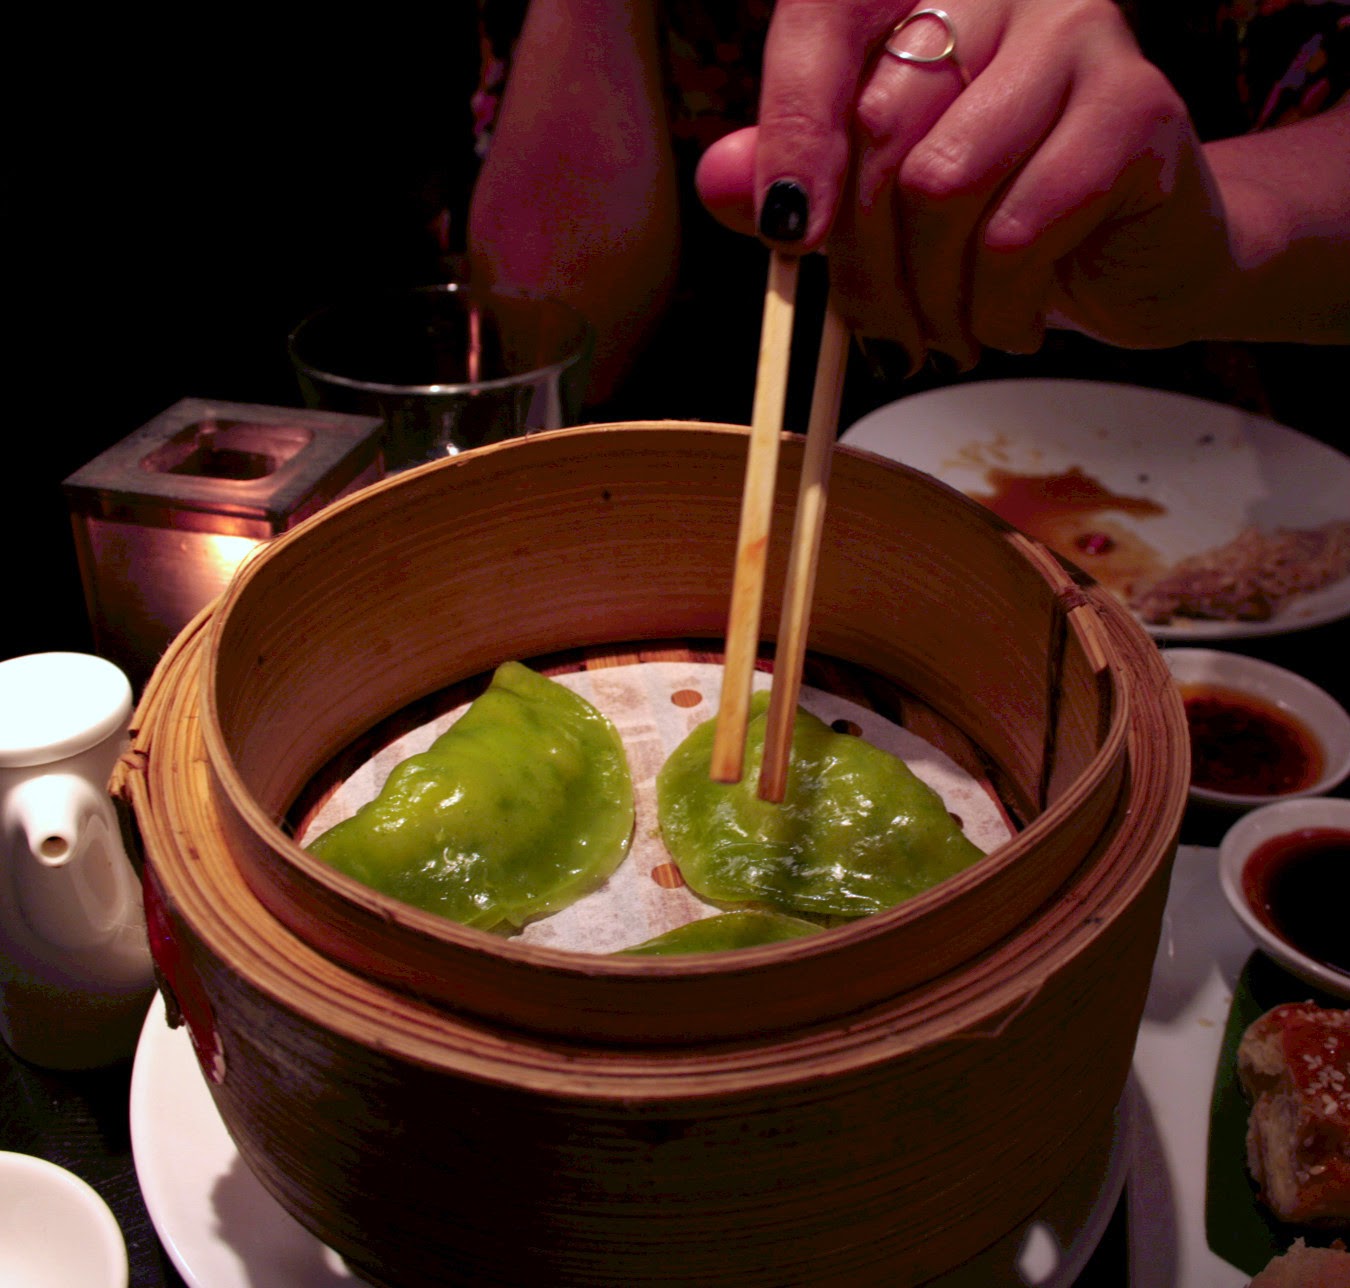 Chive and prawn dumpling from Ping Pong dim sum, Soho